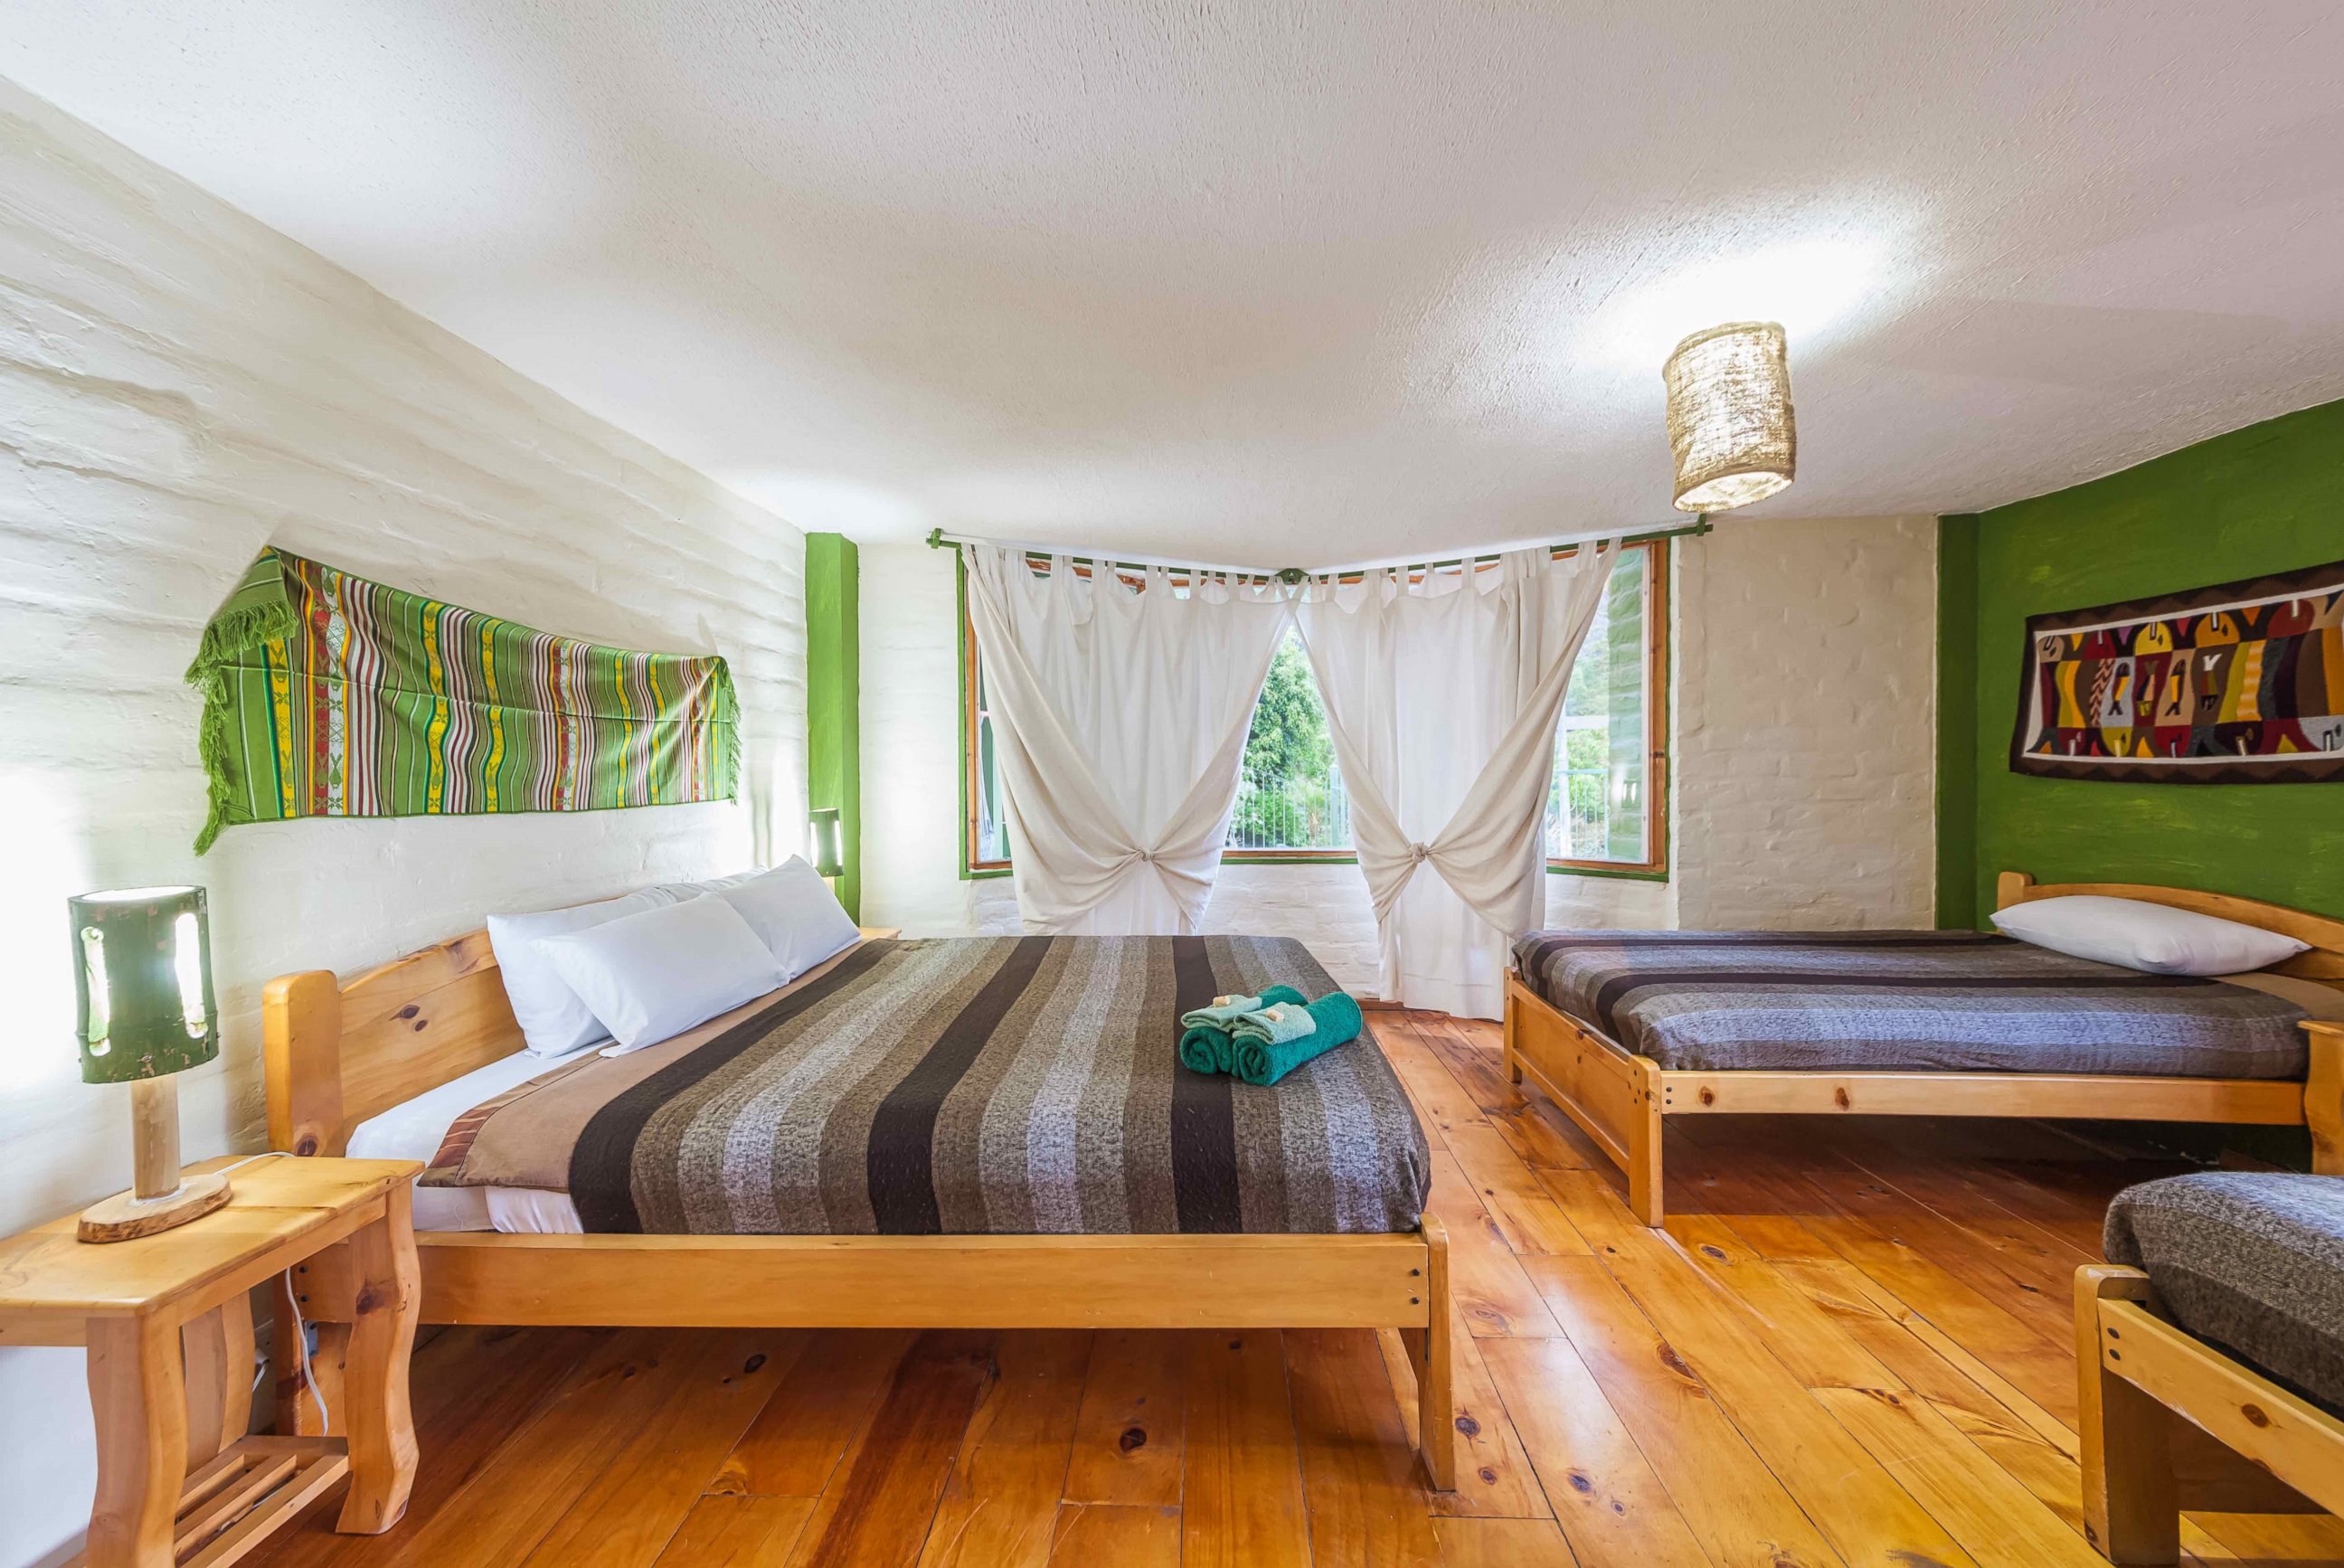 PHOTO: La Casa Verde has several room configurations to fit anything from a single guest up to an entire family.